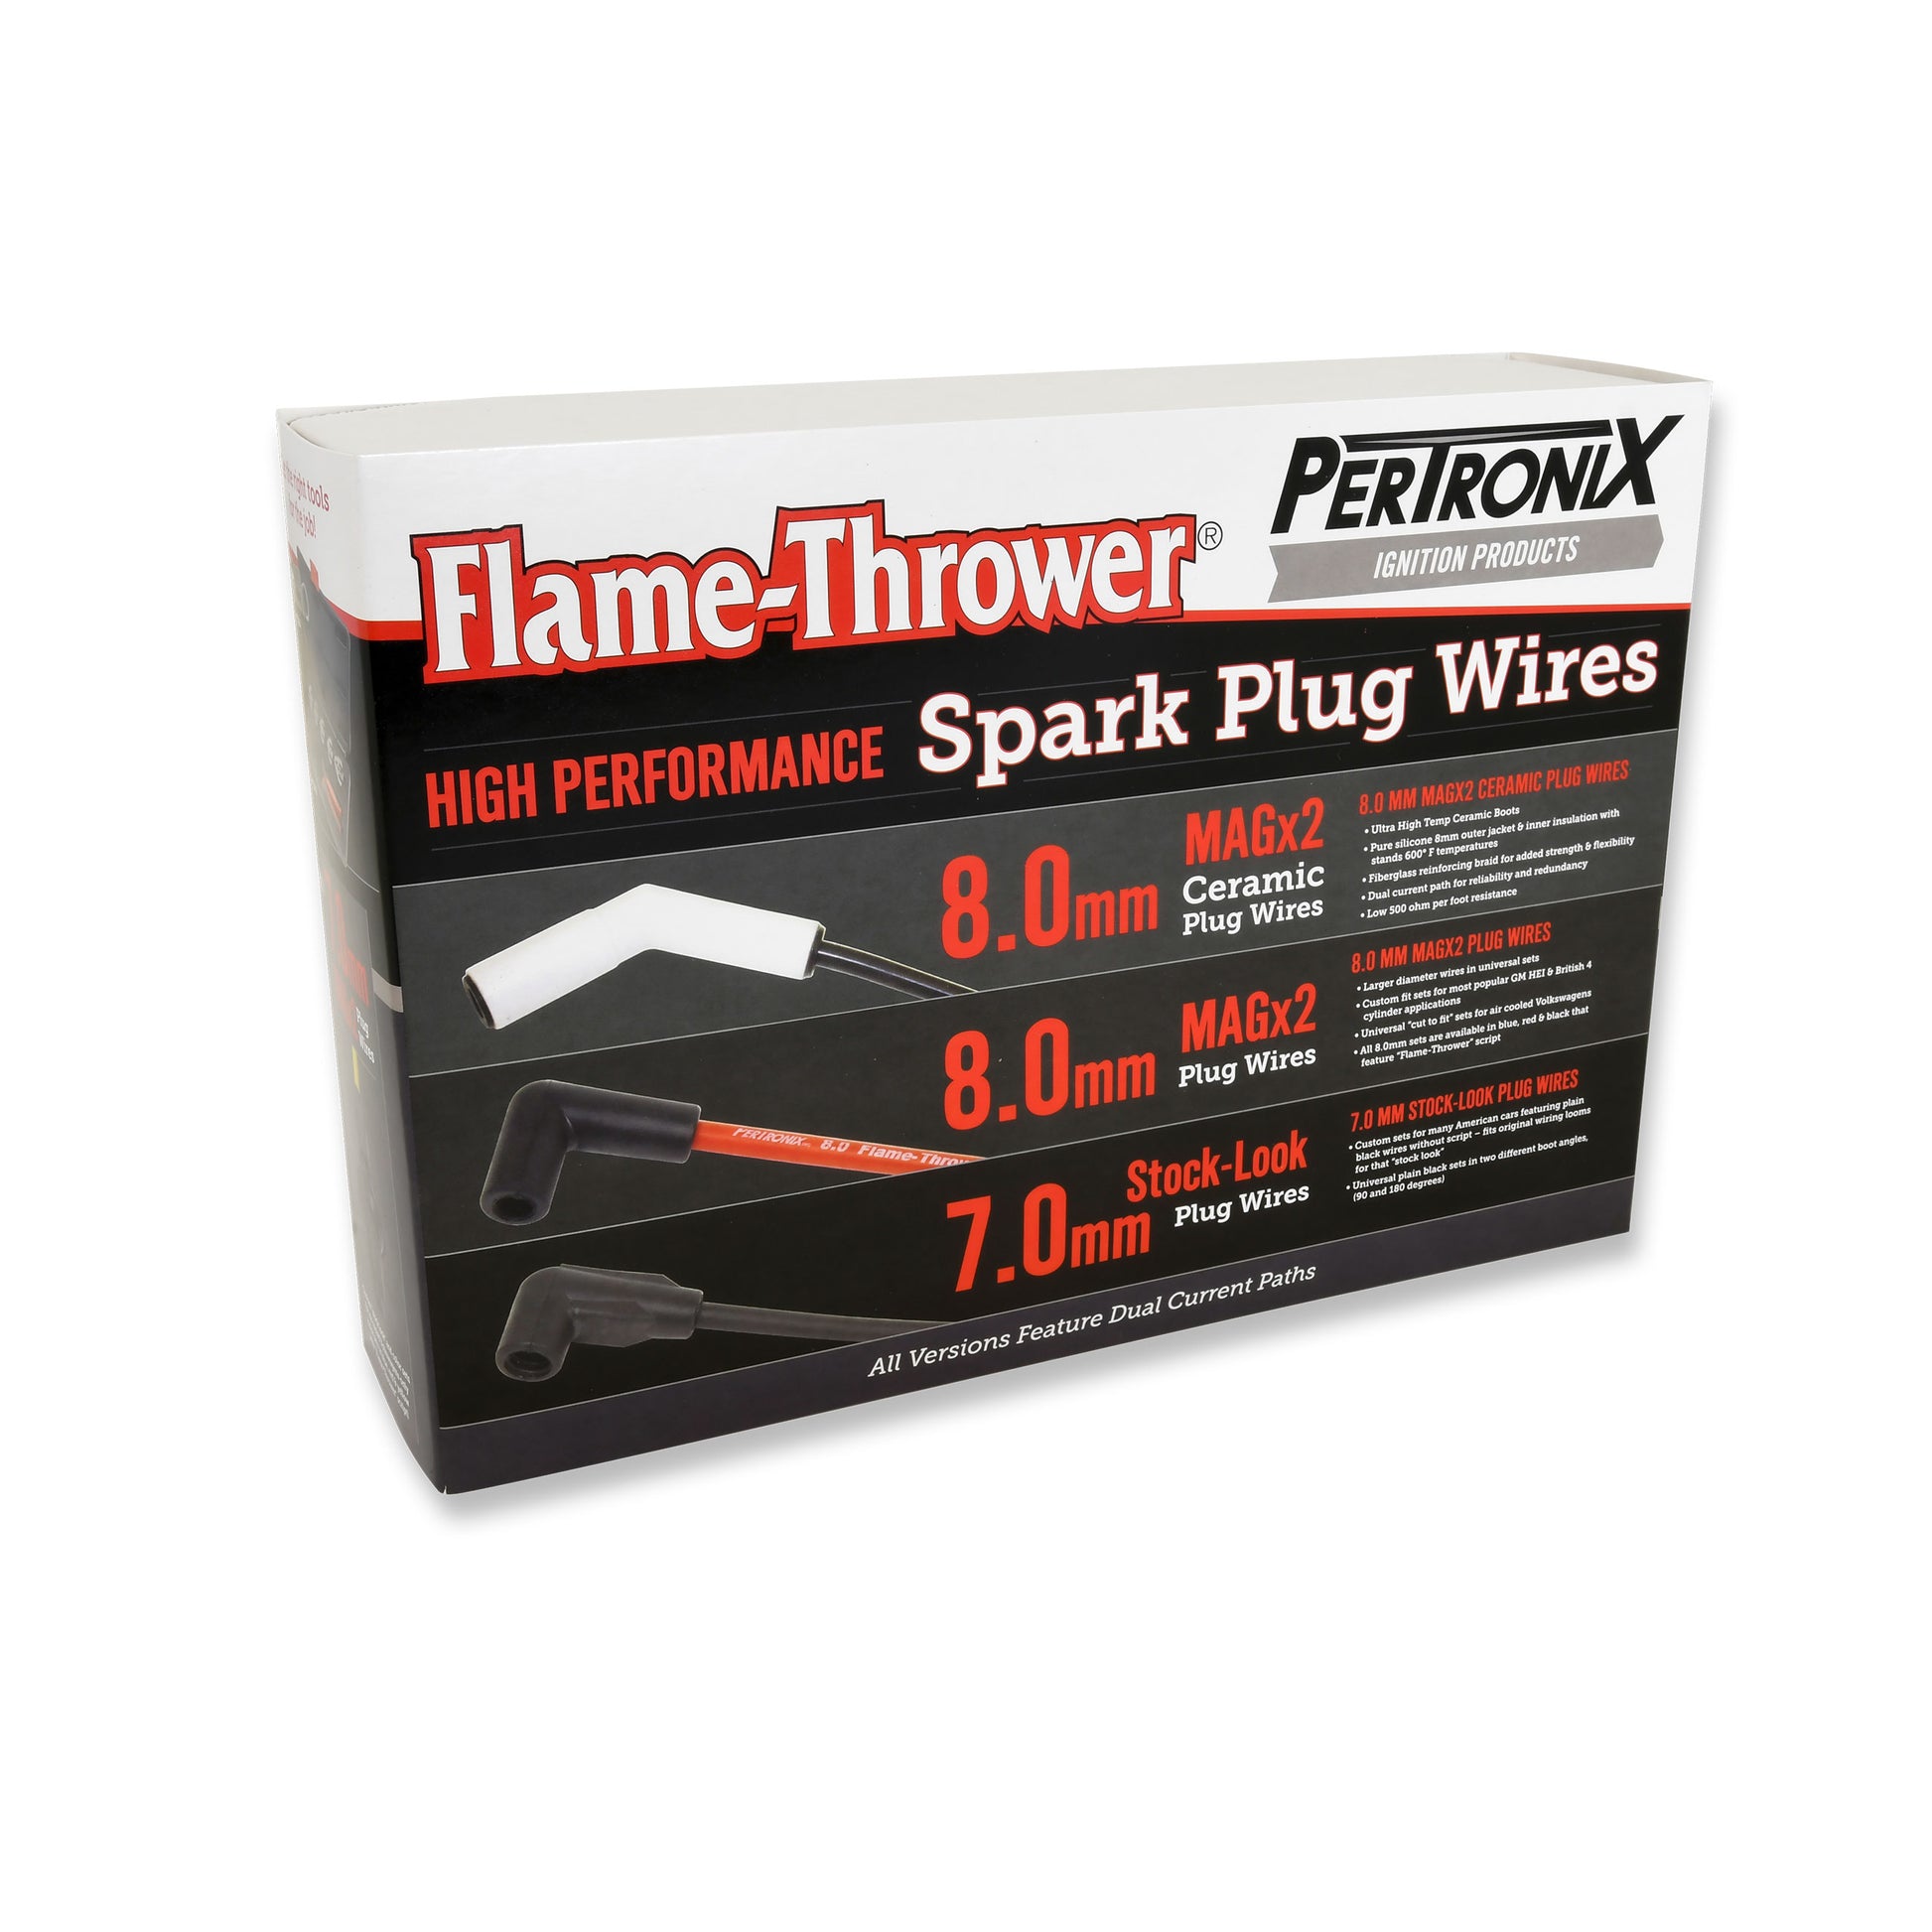 PerTronix 808290 Flame-Thrower Spark Plug Wires 8 cyl 8mm Universal 90 –  Pertronix